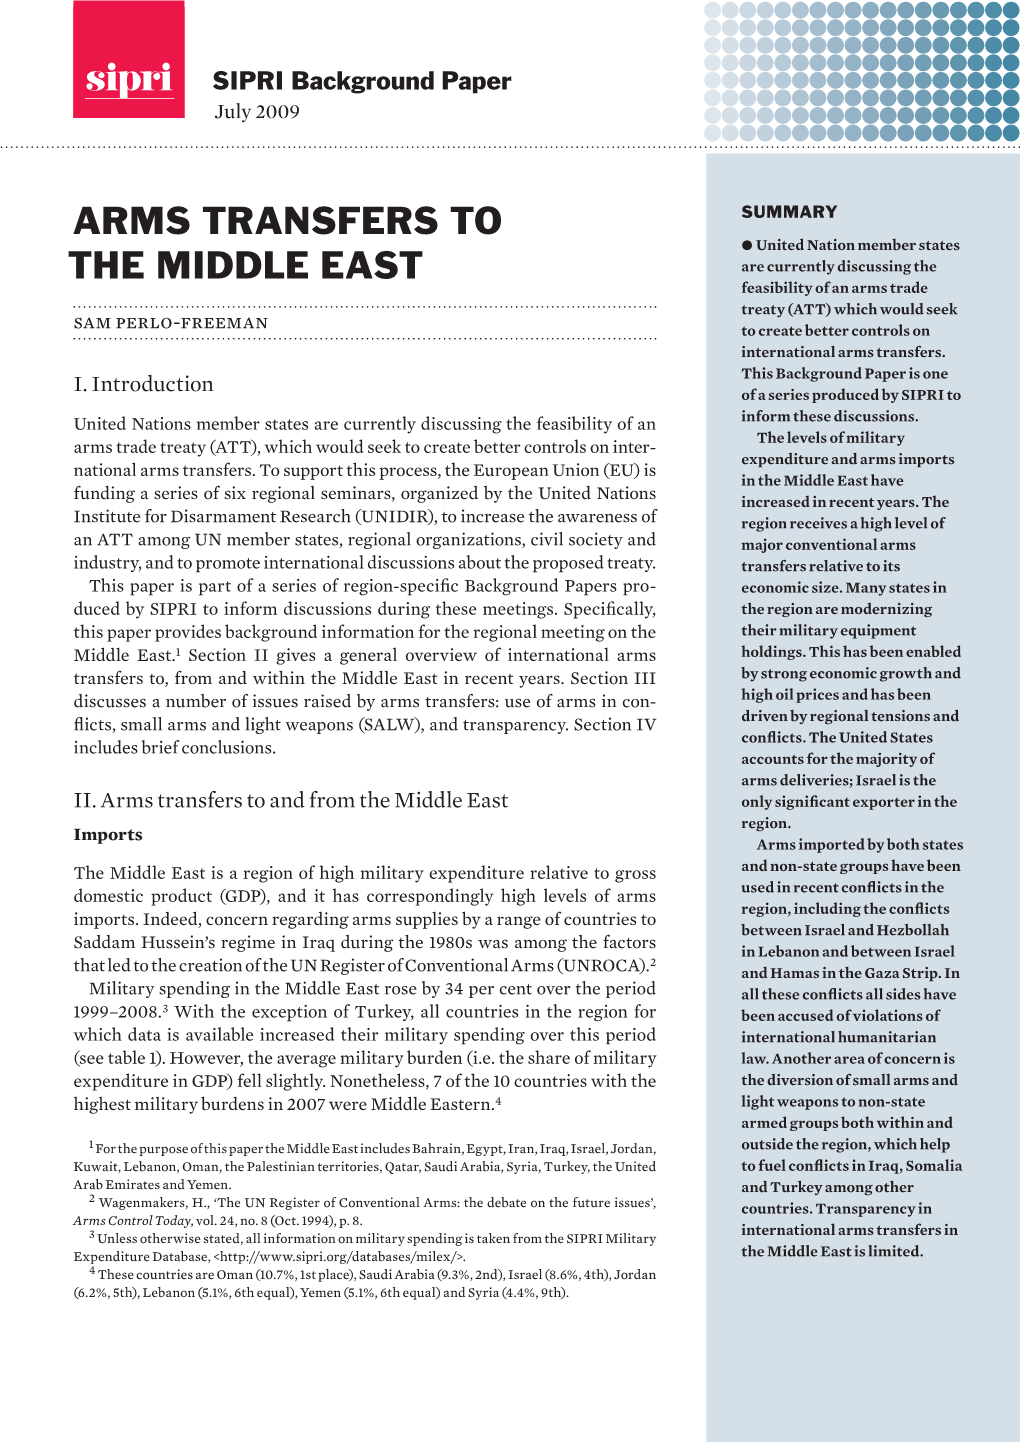 Arms Transfers to the Middle East, SIPRI Background Paper